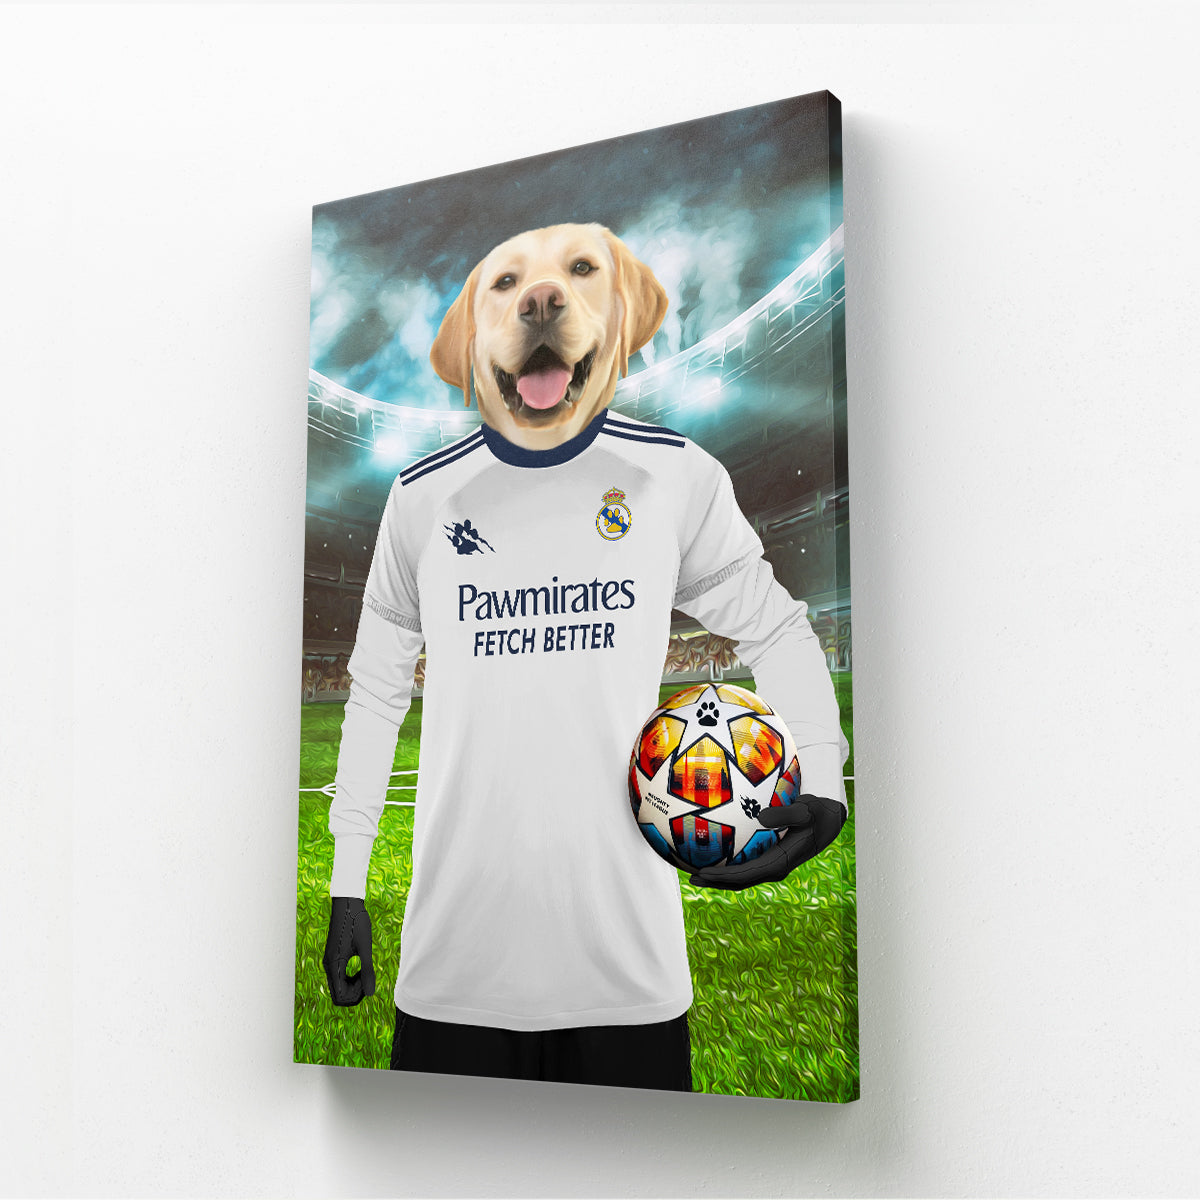 Real Pawdrid Football Club Paw & Glory, pawandglory, minimal dog art, cat picture painting, pet photo clothing, the general portrait, dog portraits as humans, digital pet paintings, pet portraits